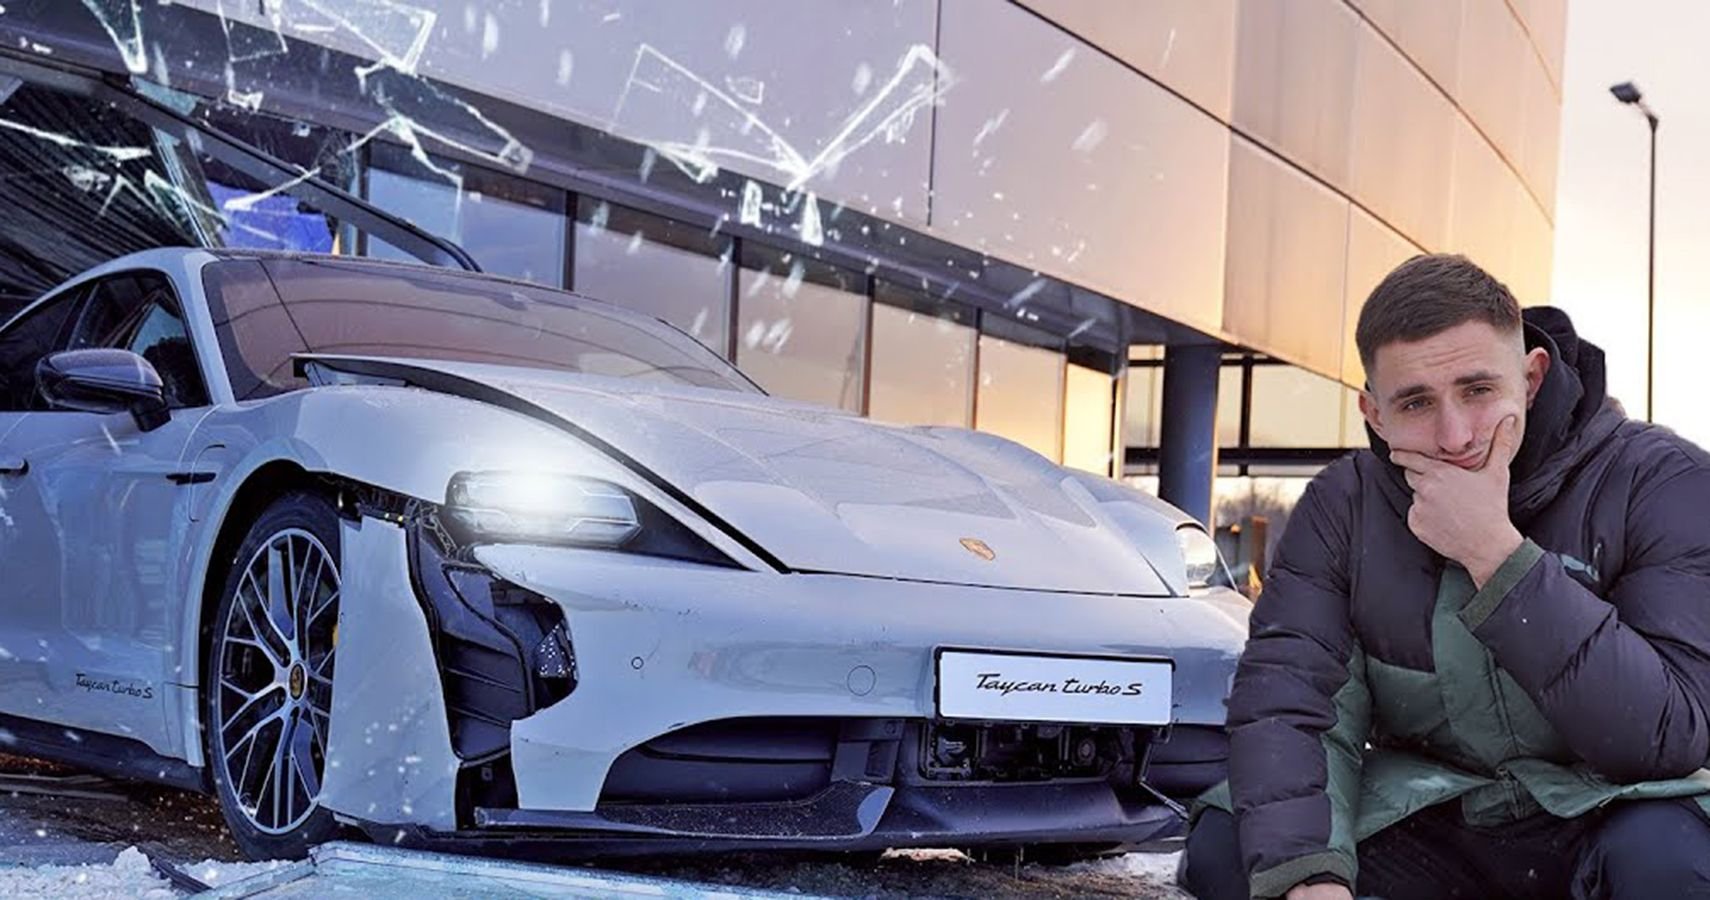 Watch: YouTuber Drives A New Taycan Turbo S Off The Dealership Floor Into A Glass Window